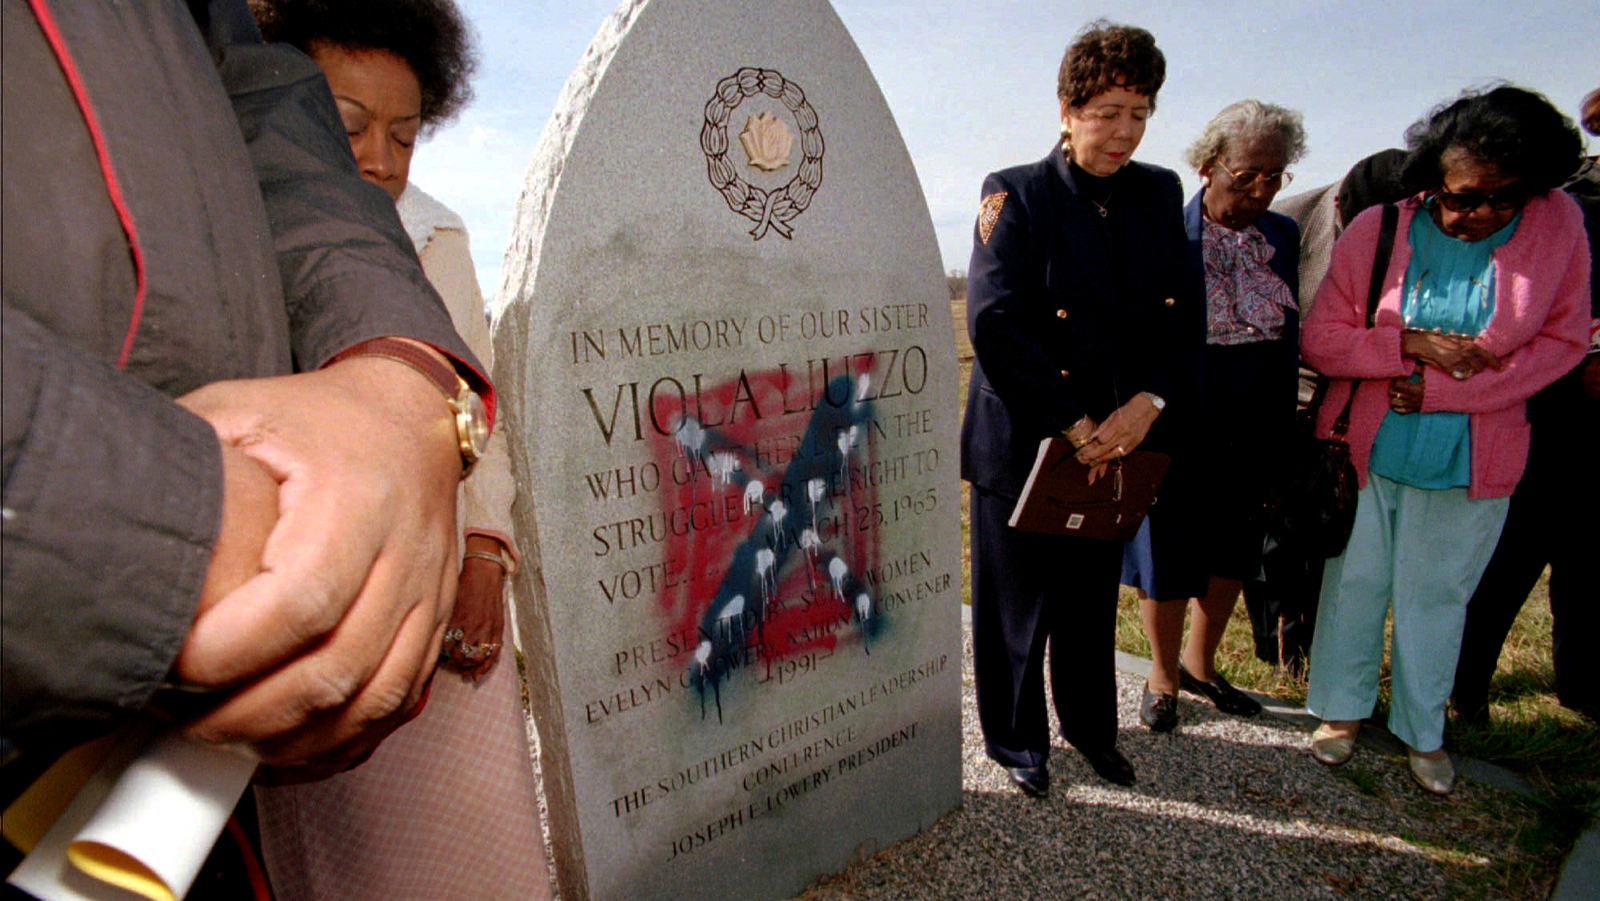 Southern Christian Leadership Conference/Women members and supporters gather in prayer around the defaced monument to civil rights worker Viola Liuzzo in Haneyville, Ala., Feb. 5, 1997. (AP/stf)